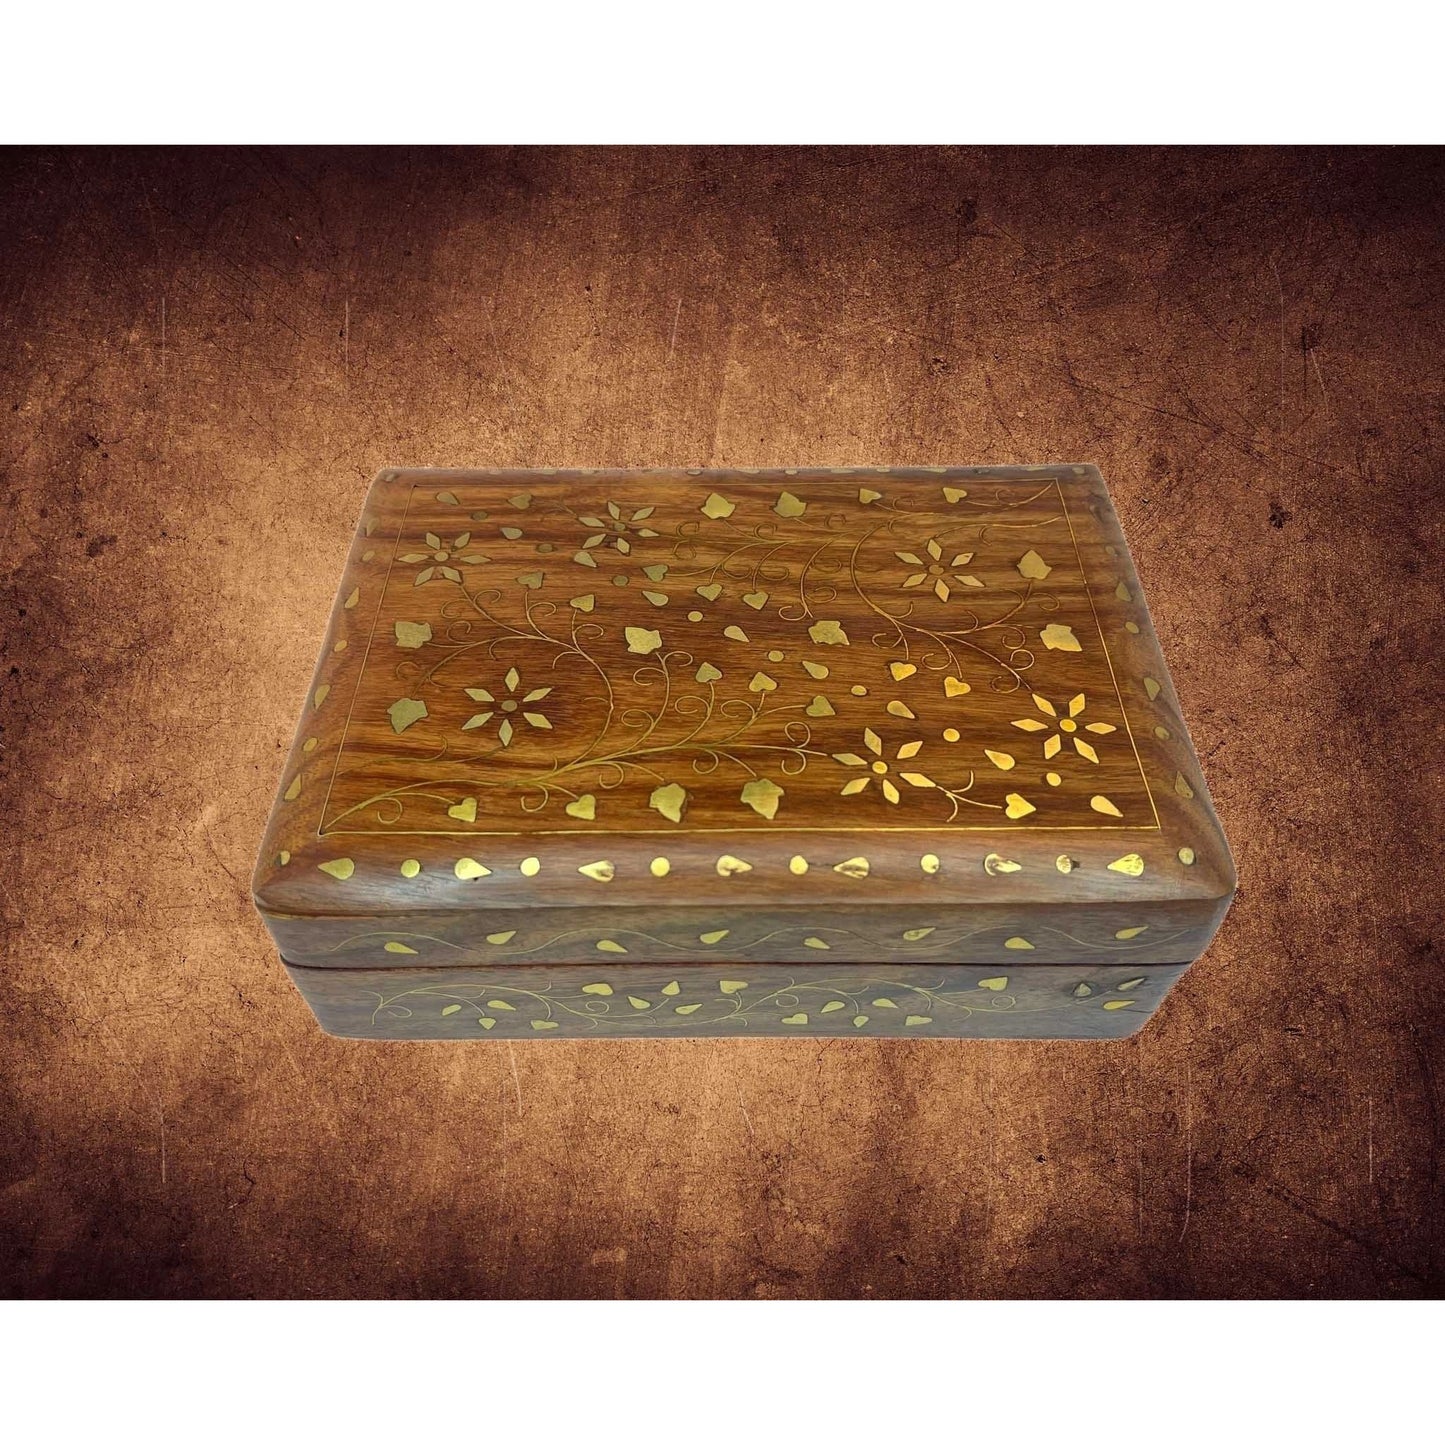 Wooden Floral Design Brass Inlay Decorative Box with Red Velvet Lining